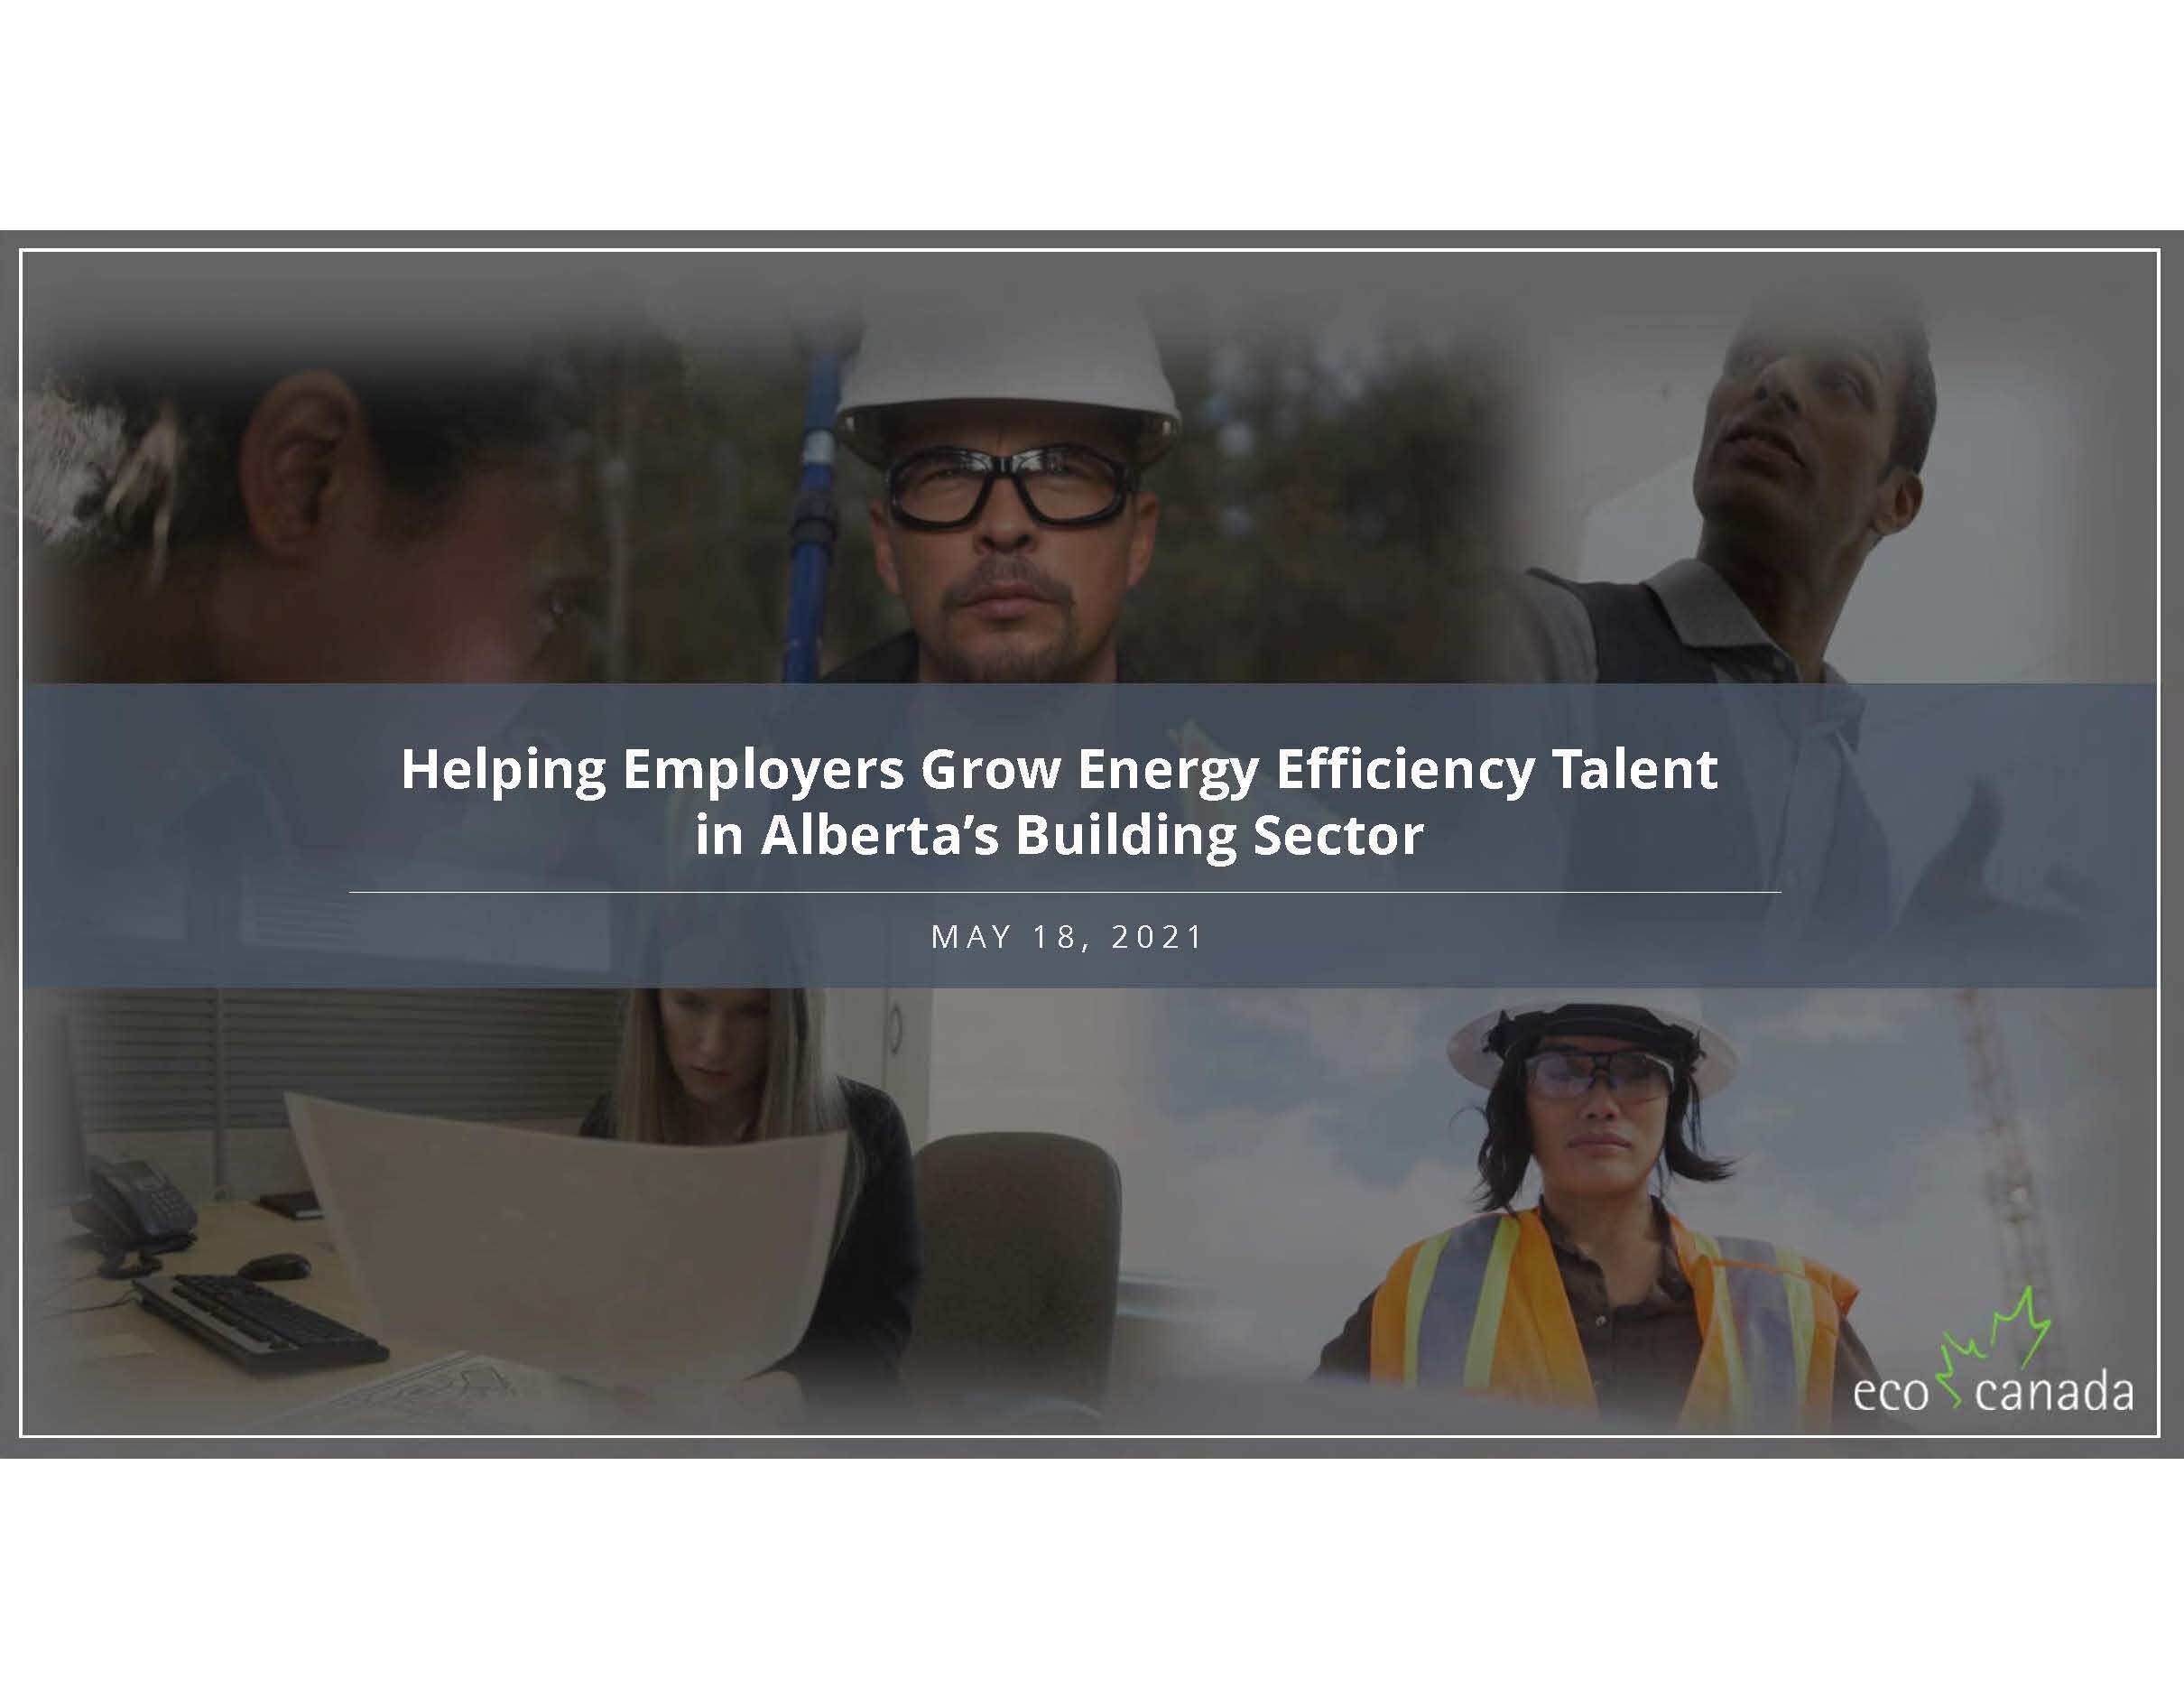 Helping Employers Grow Energy Efficiency Talent in Alberta’s Building Sector - Geni Peters ECO Canada_Page_1.jpg